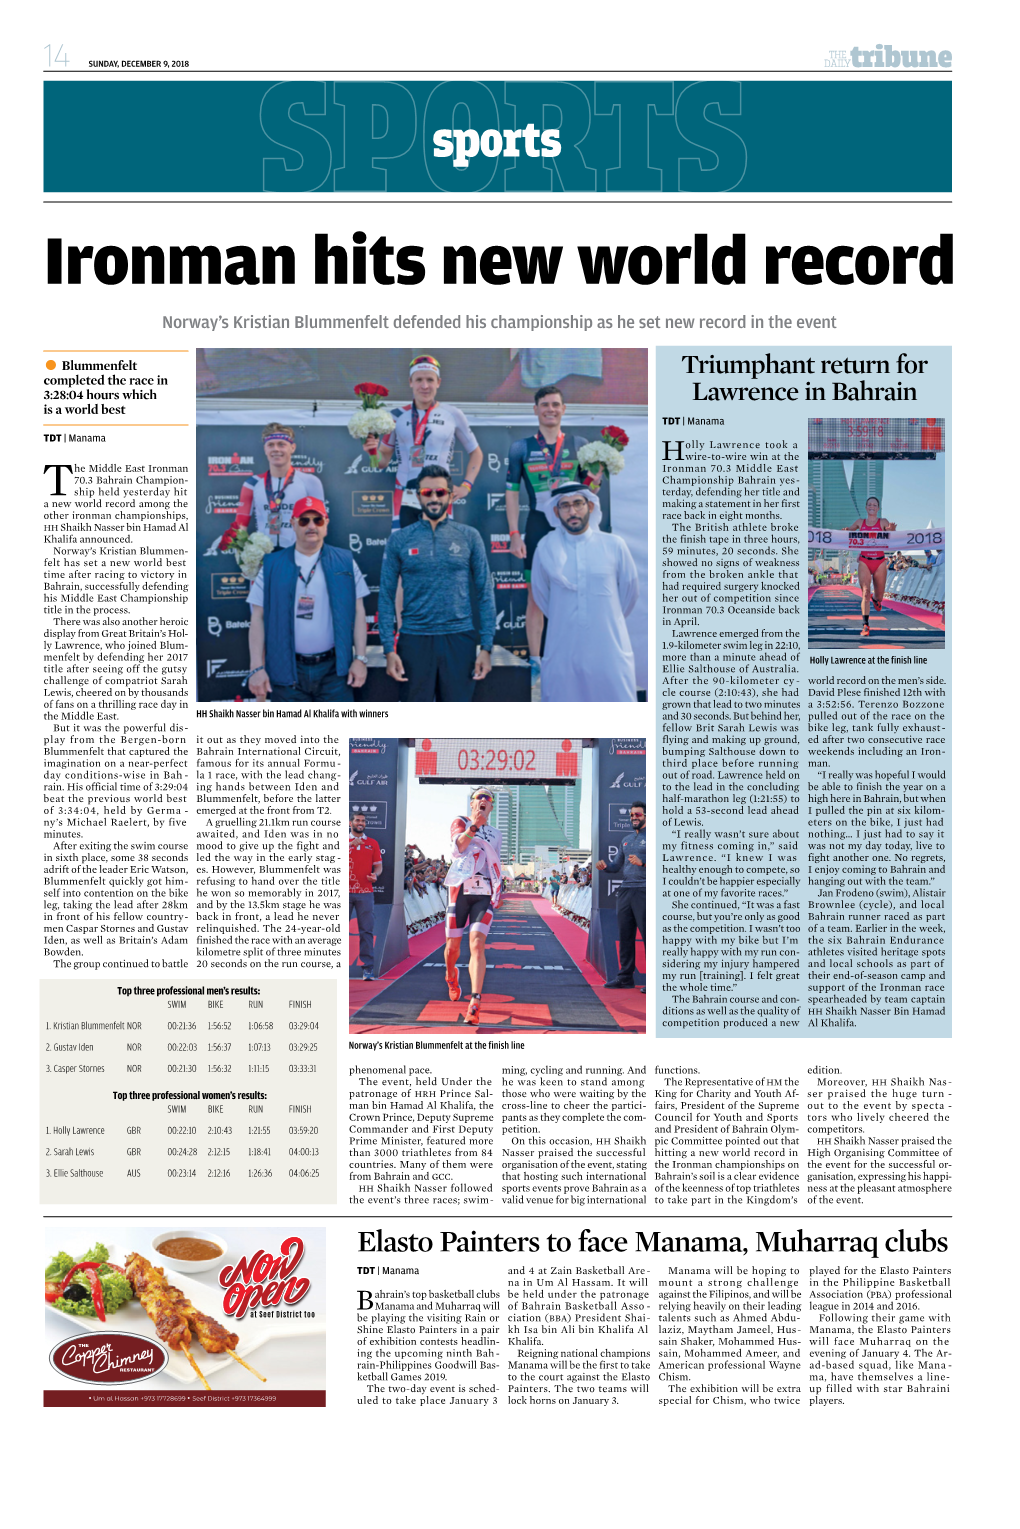 Ironman Hits New World Record Norway’S Kristian Blummenfelt Defended His Championship As He Set New Record in the Event